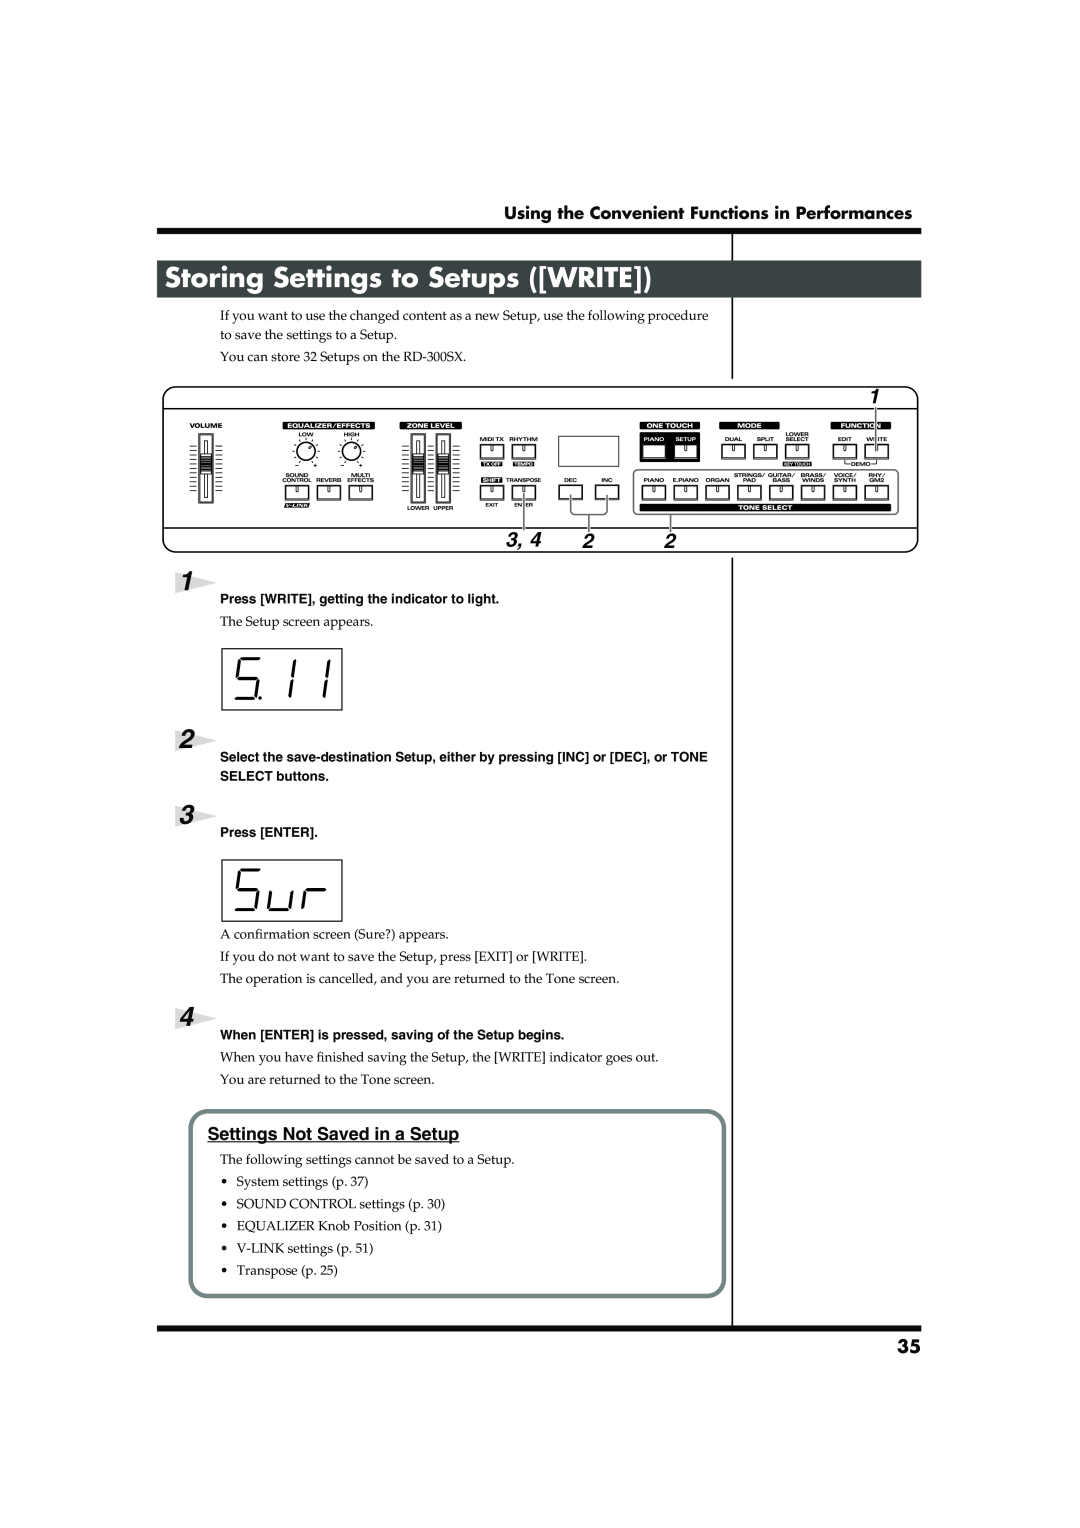 Roland RD-300SX owner manual Storing Settings to Setups WRITE, Settings Not Saved in a Setup, SELECT buttons, Press ENTER 